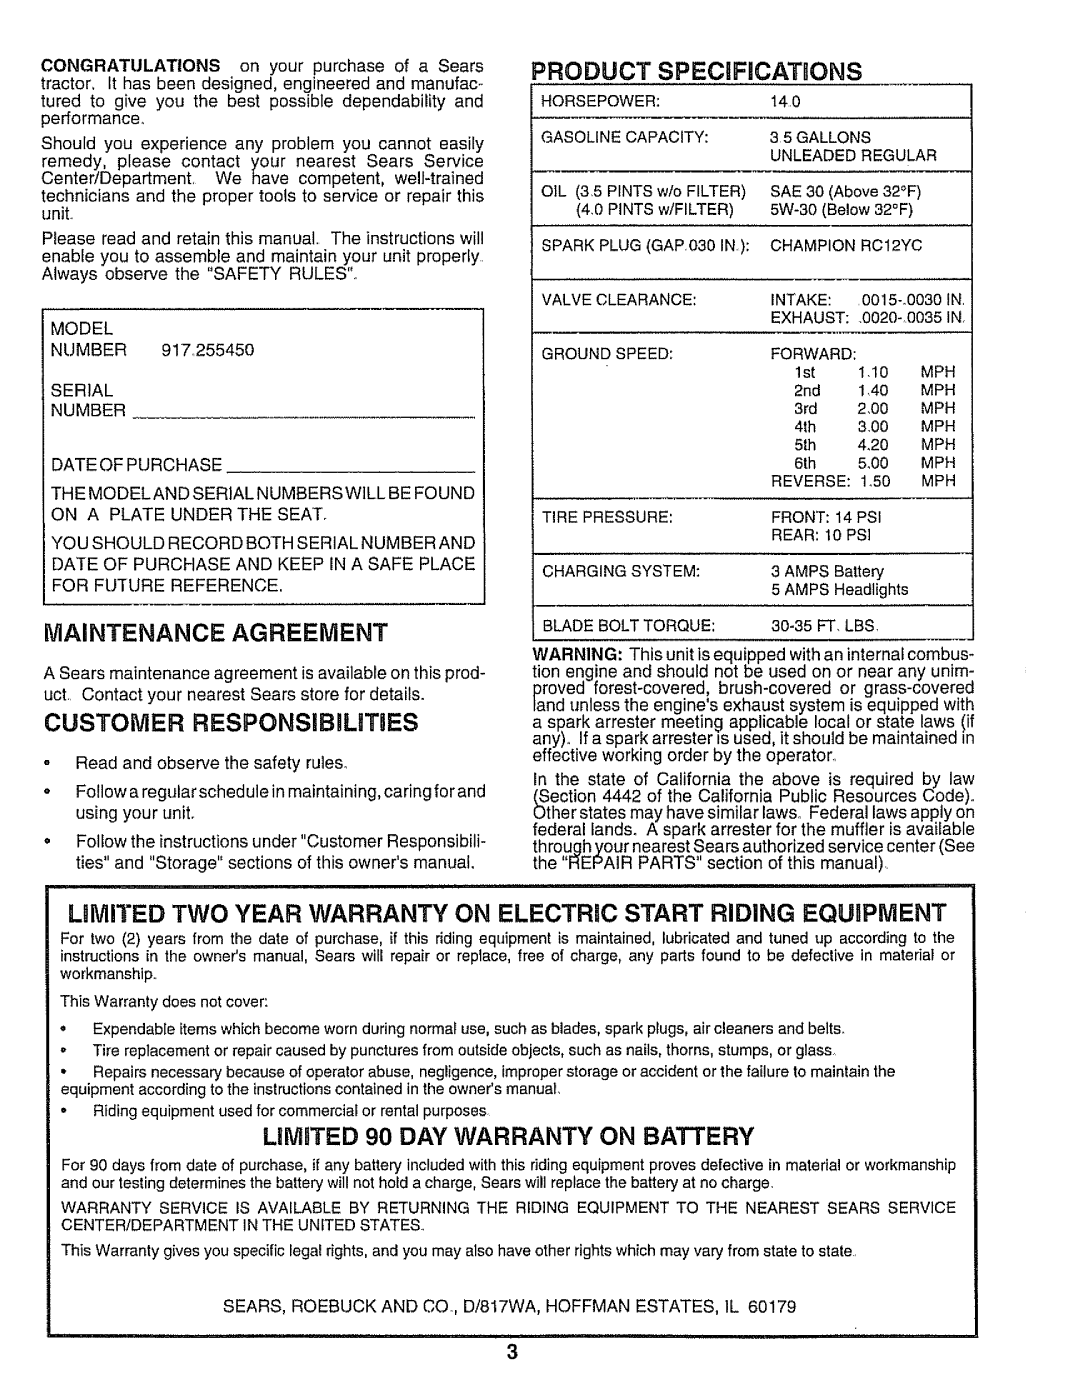 Sears 917.25545 owner manual Maintenance Agreement, CUSTOMER RESPONSiBILiTiES, Product Specificat Ons 